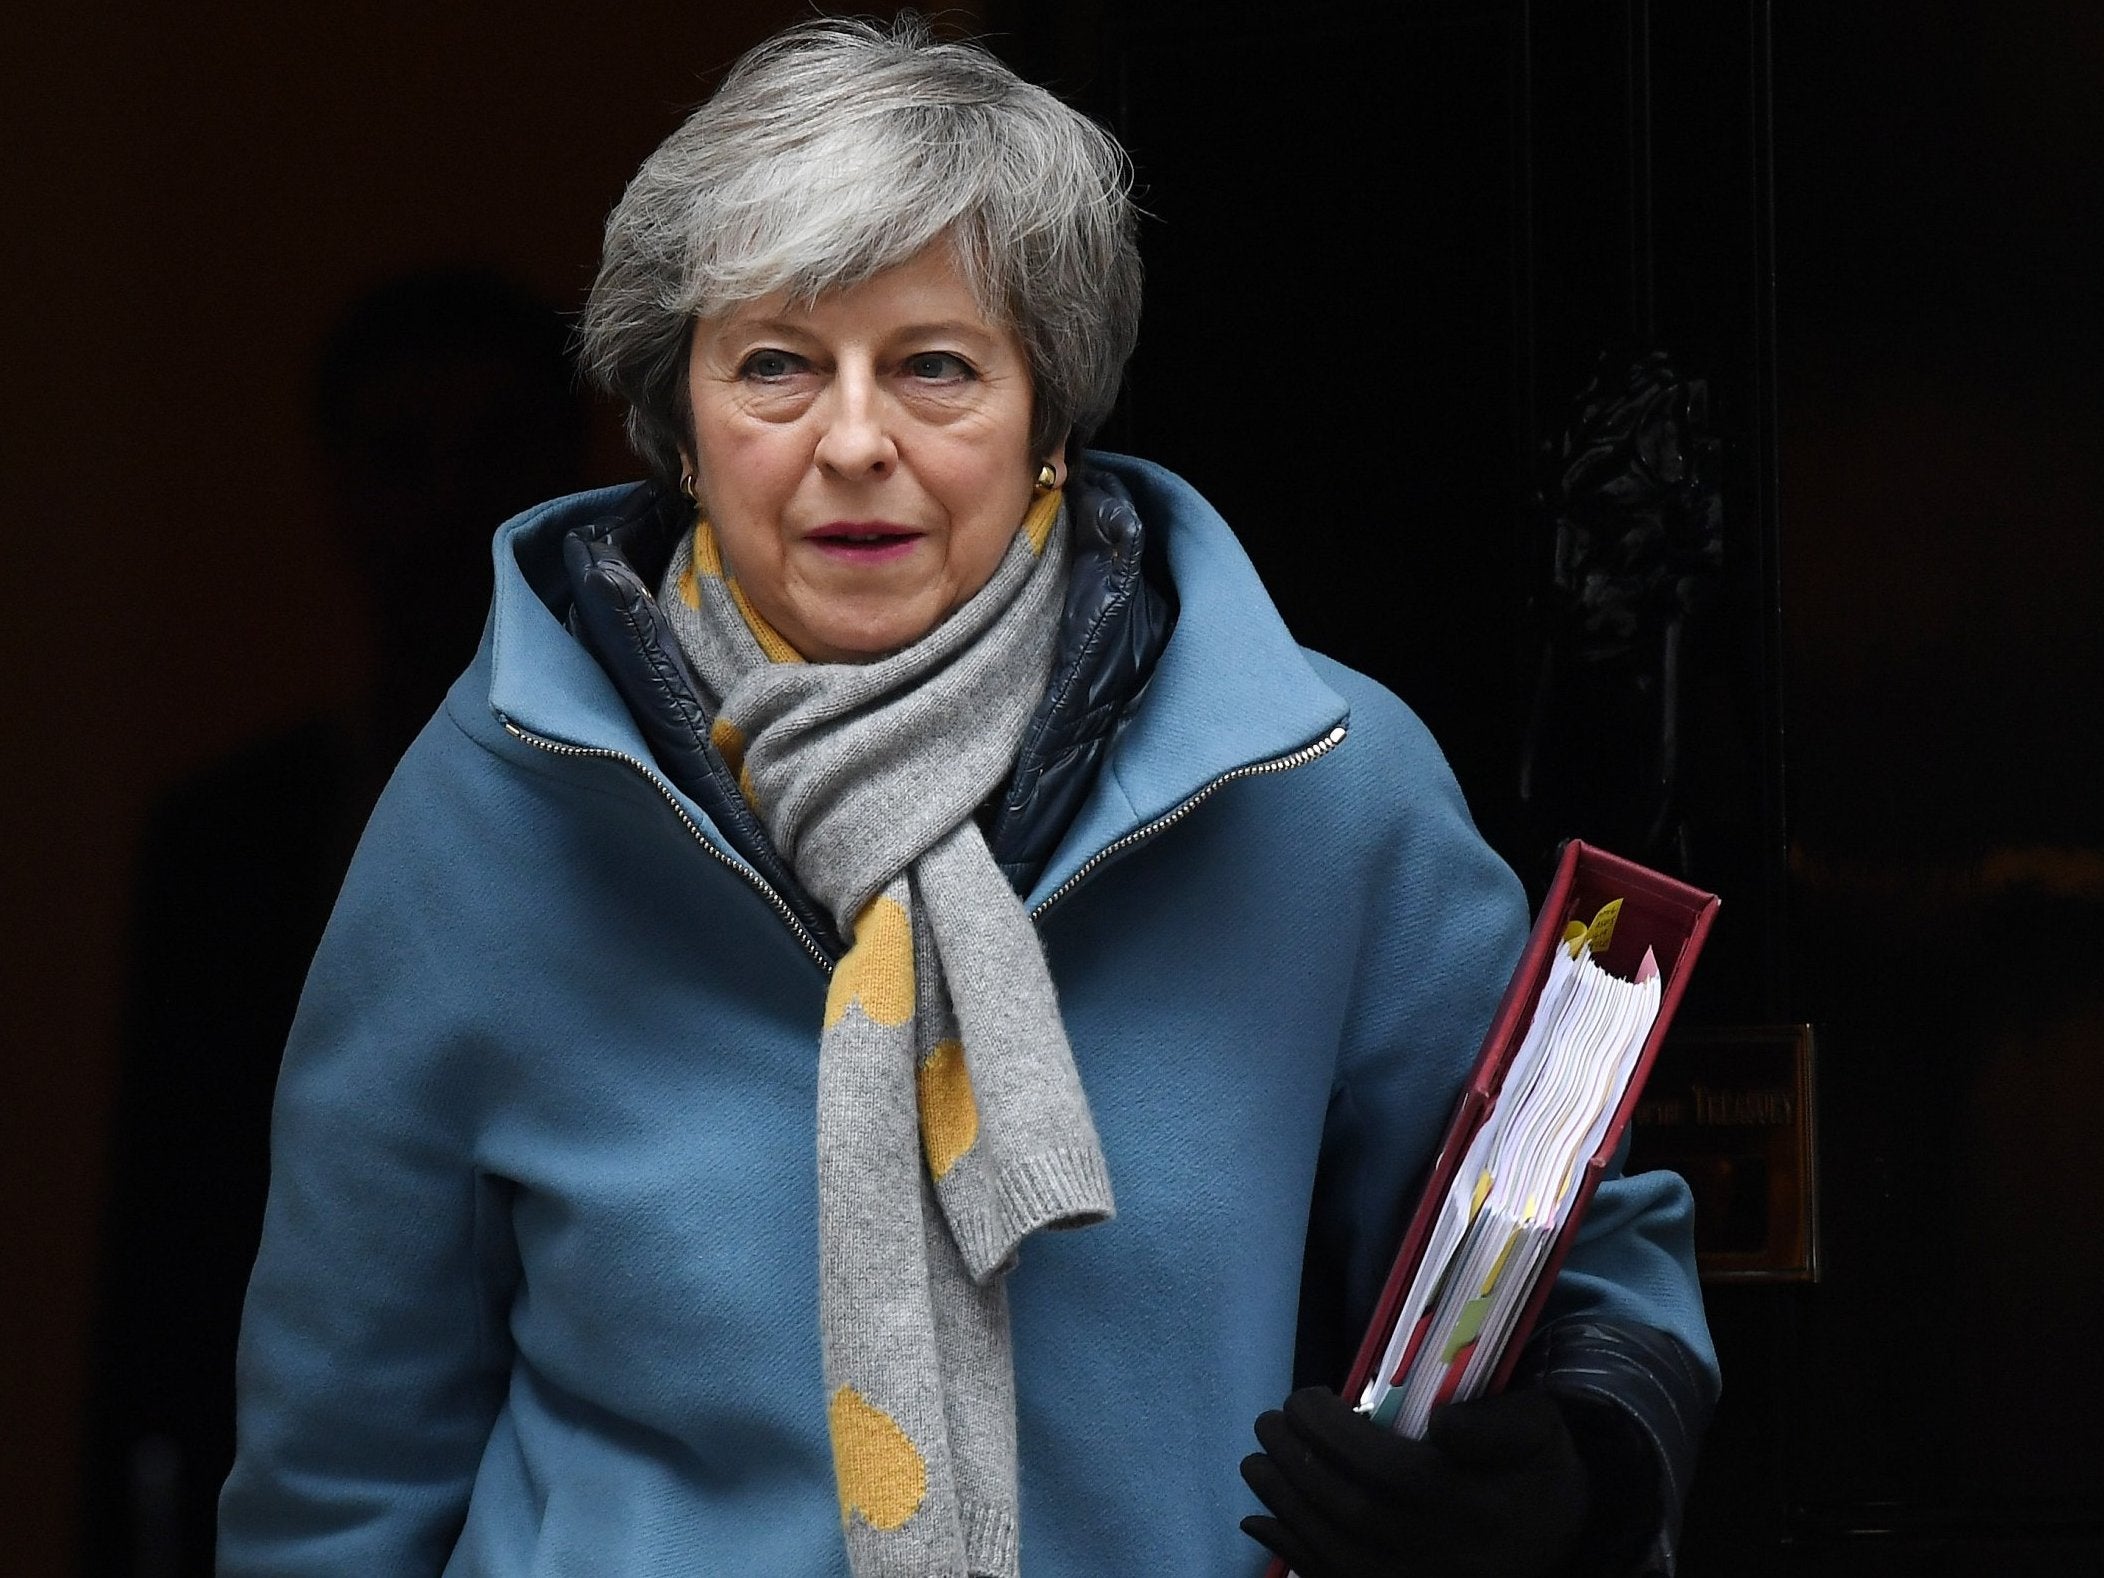 Brexit: Theresa May's resignation publicly demanded by MPs as price for backing withdrawal deal